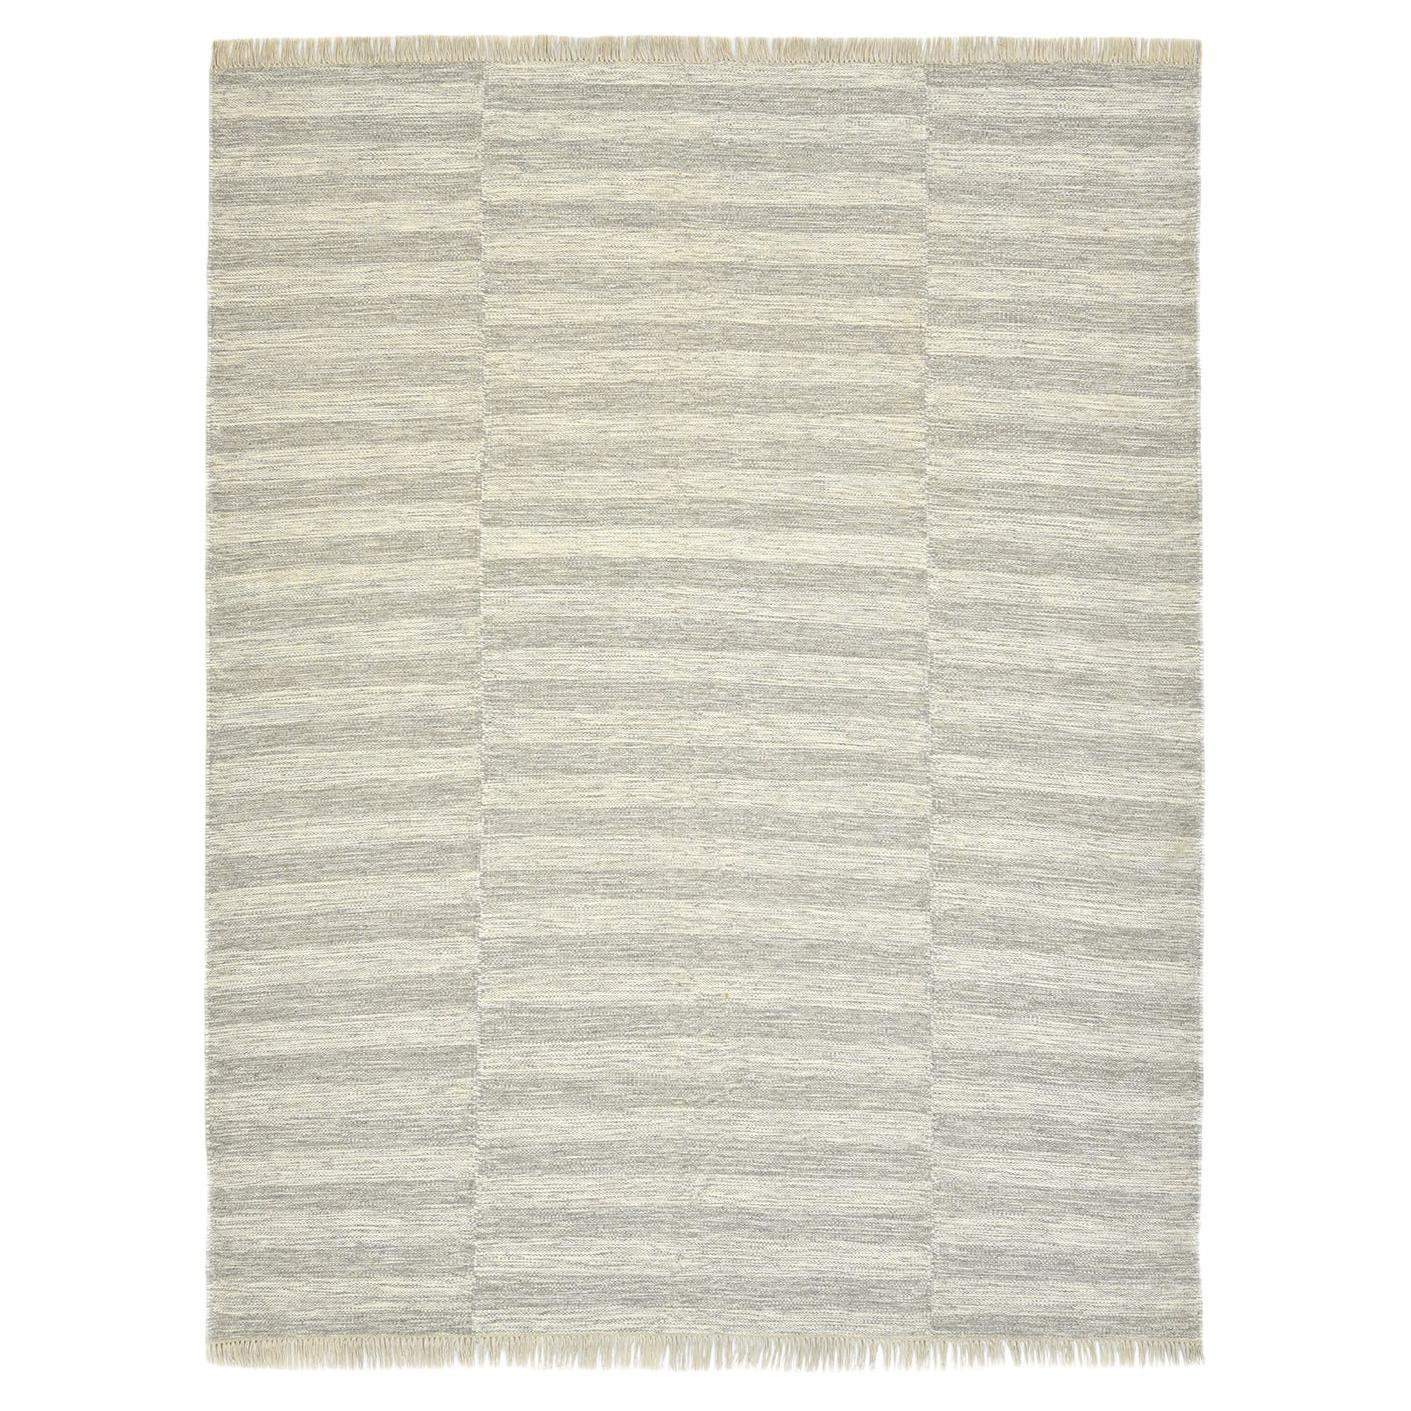 Solo Rugs Flatweave Striped Hand Woven Gray Area Rug